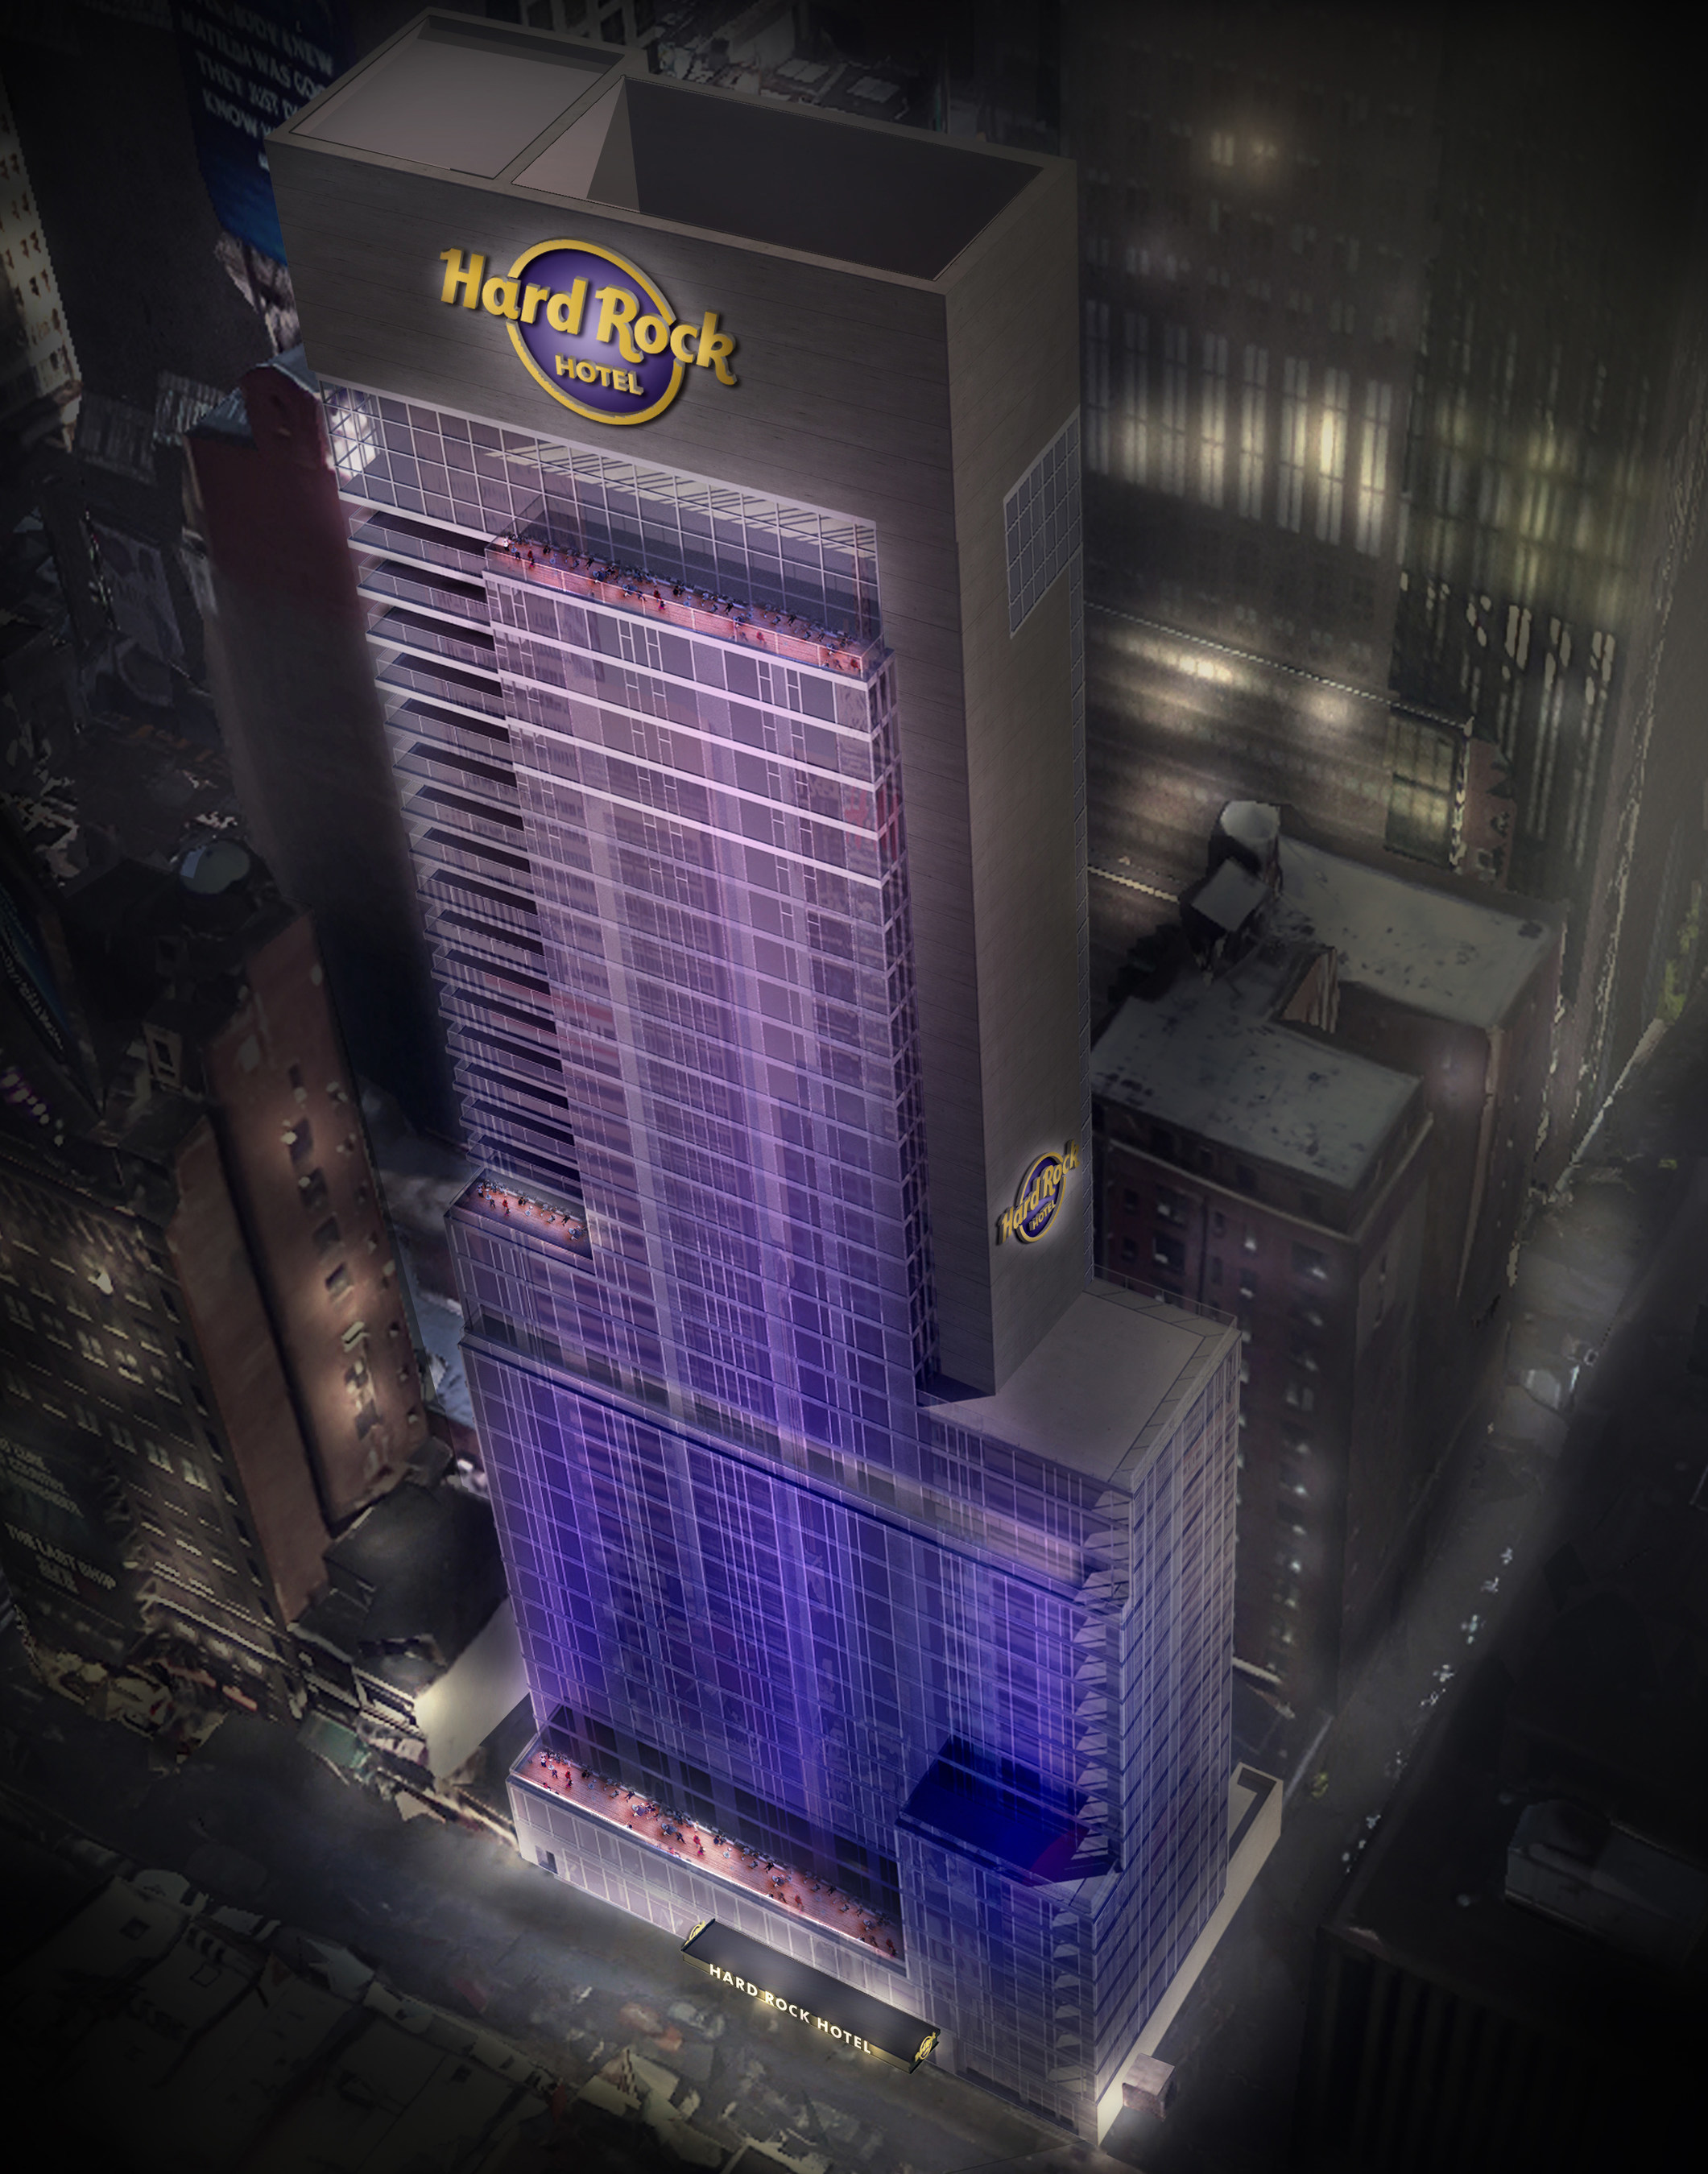 Hard Rock Hotels Brings The Sound Of Music Back To New York City's